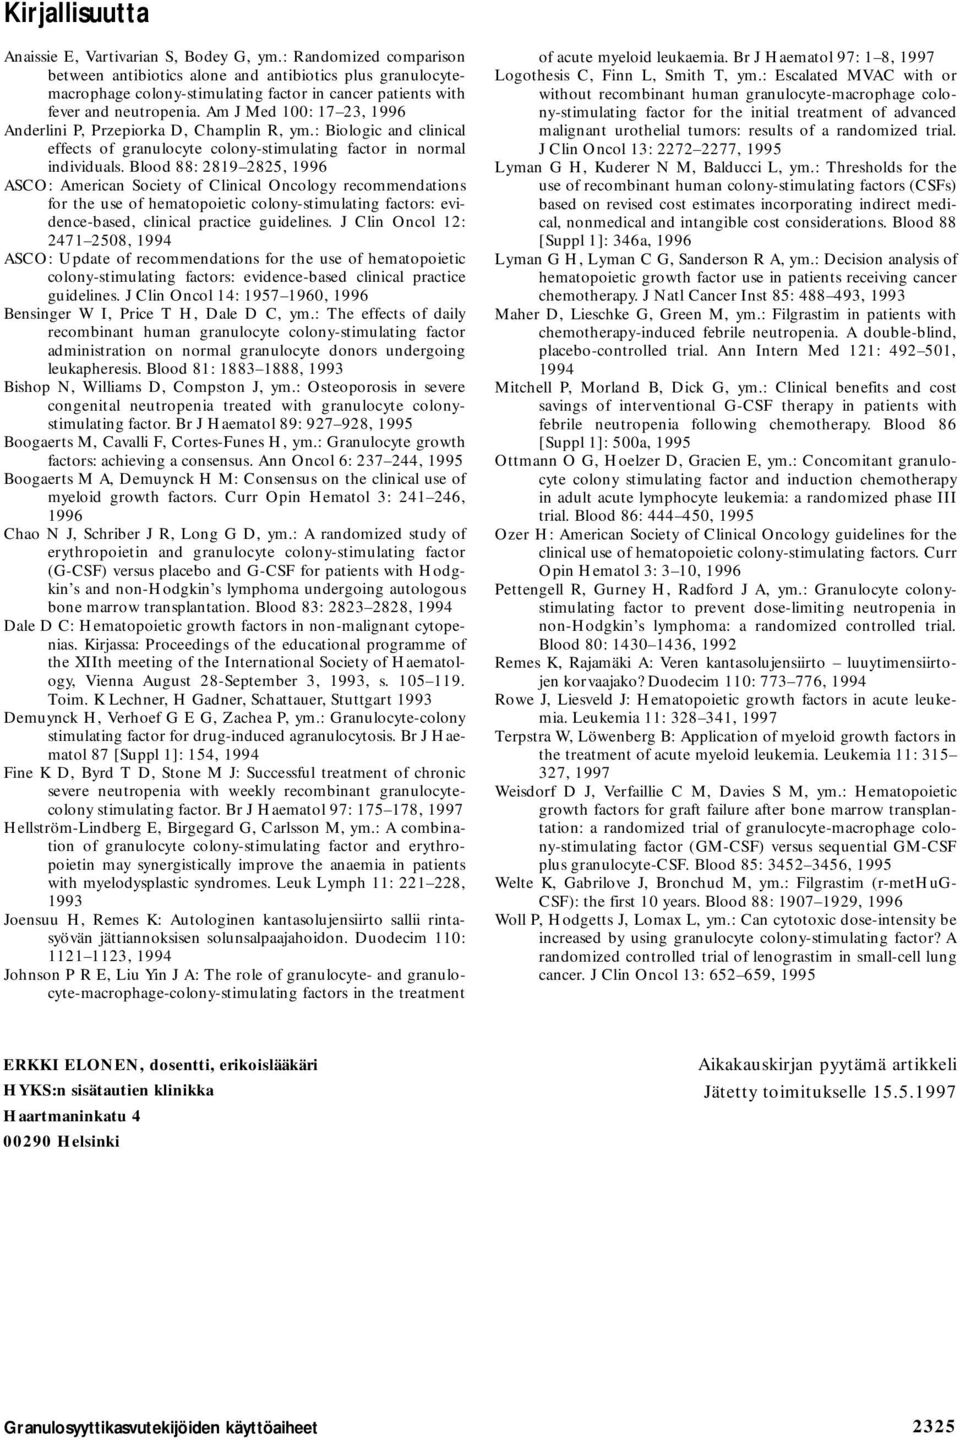 Am J Med 100: 17 23, 1996 Anderlini P, Przepiorka D, Champlin R, ym.: Biologic and clinical effects of granulocyte colony-stimulating factor in normal individuals.